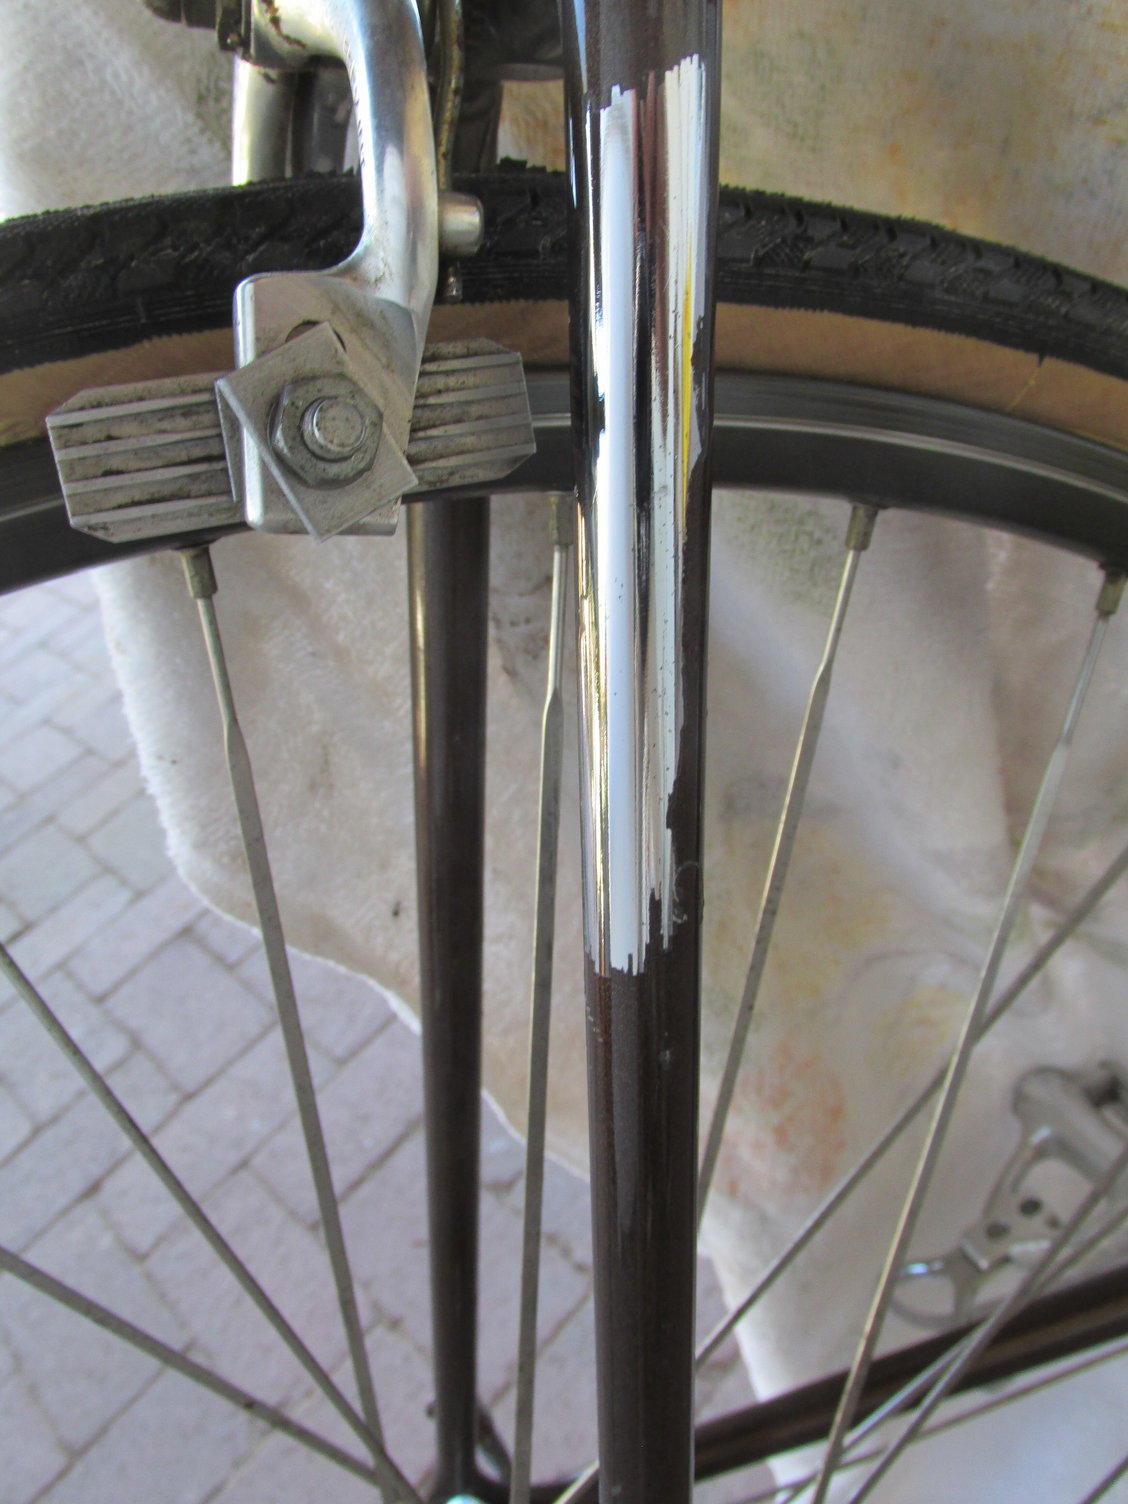 How to expose chrome under paint without damaging it? - Bike Forums